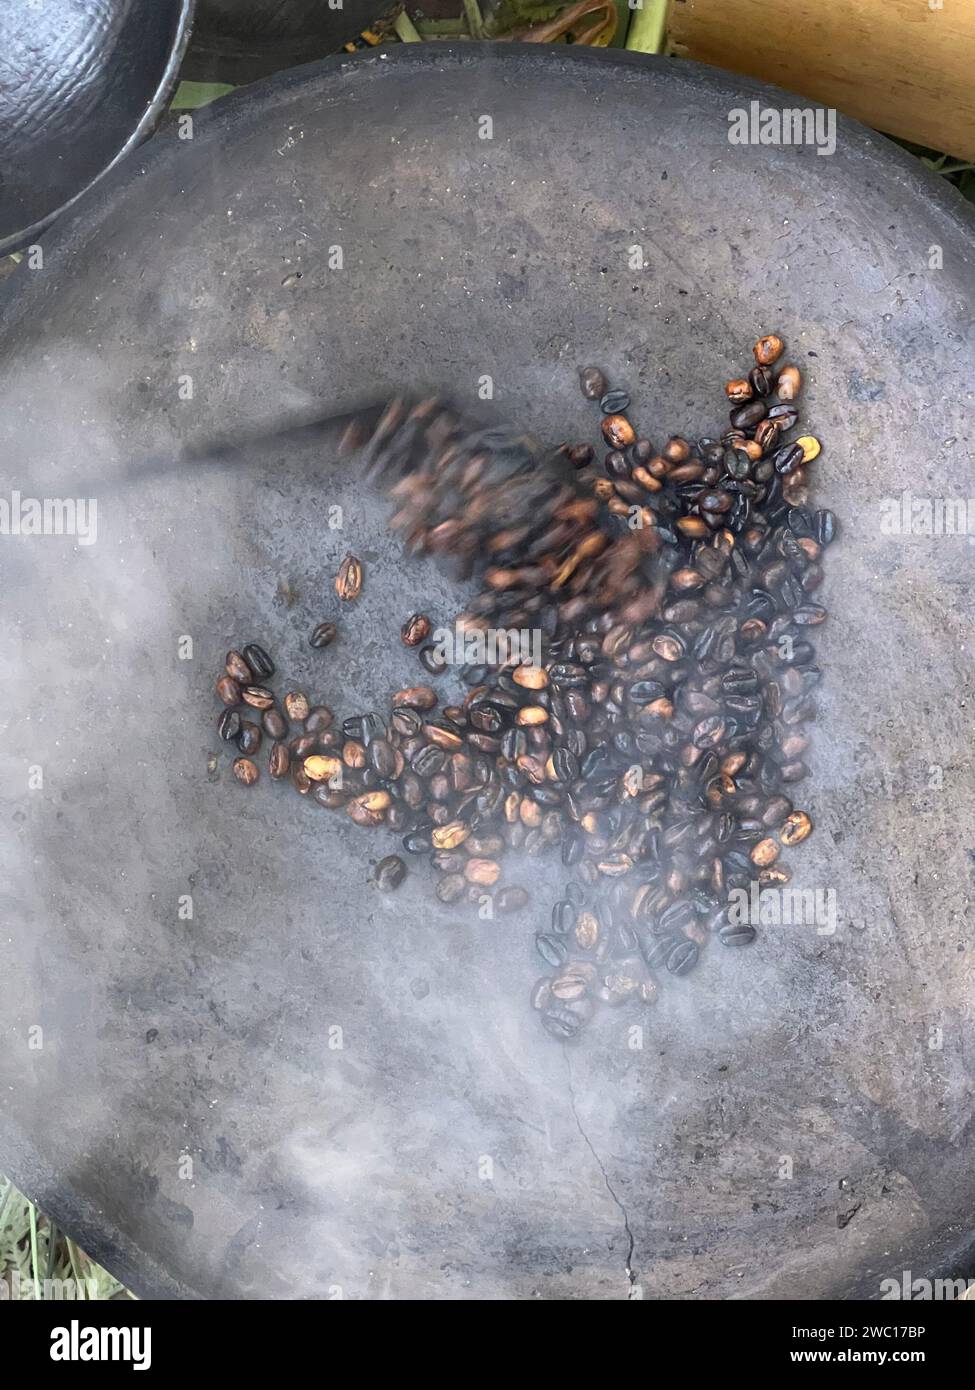 coffee beans being roasted by hand in the traditional way on a wood-fired stove seen from above through the smoke Stock Photo